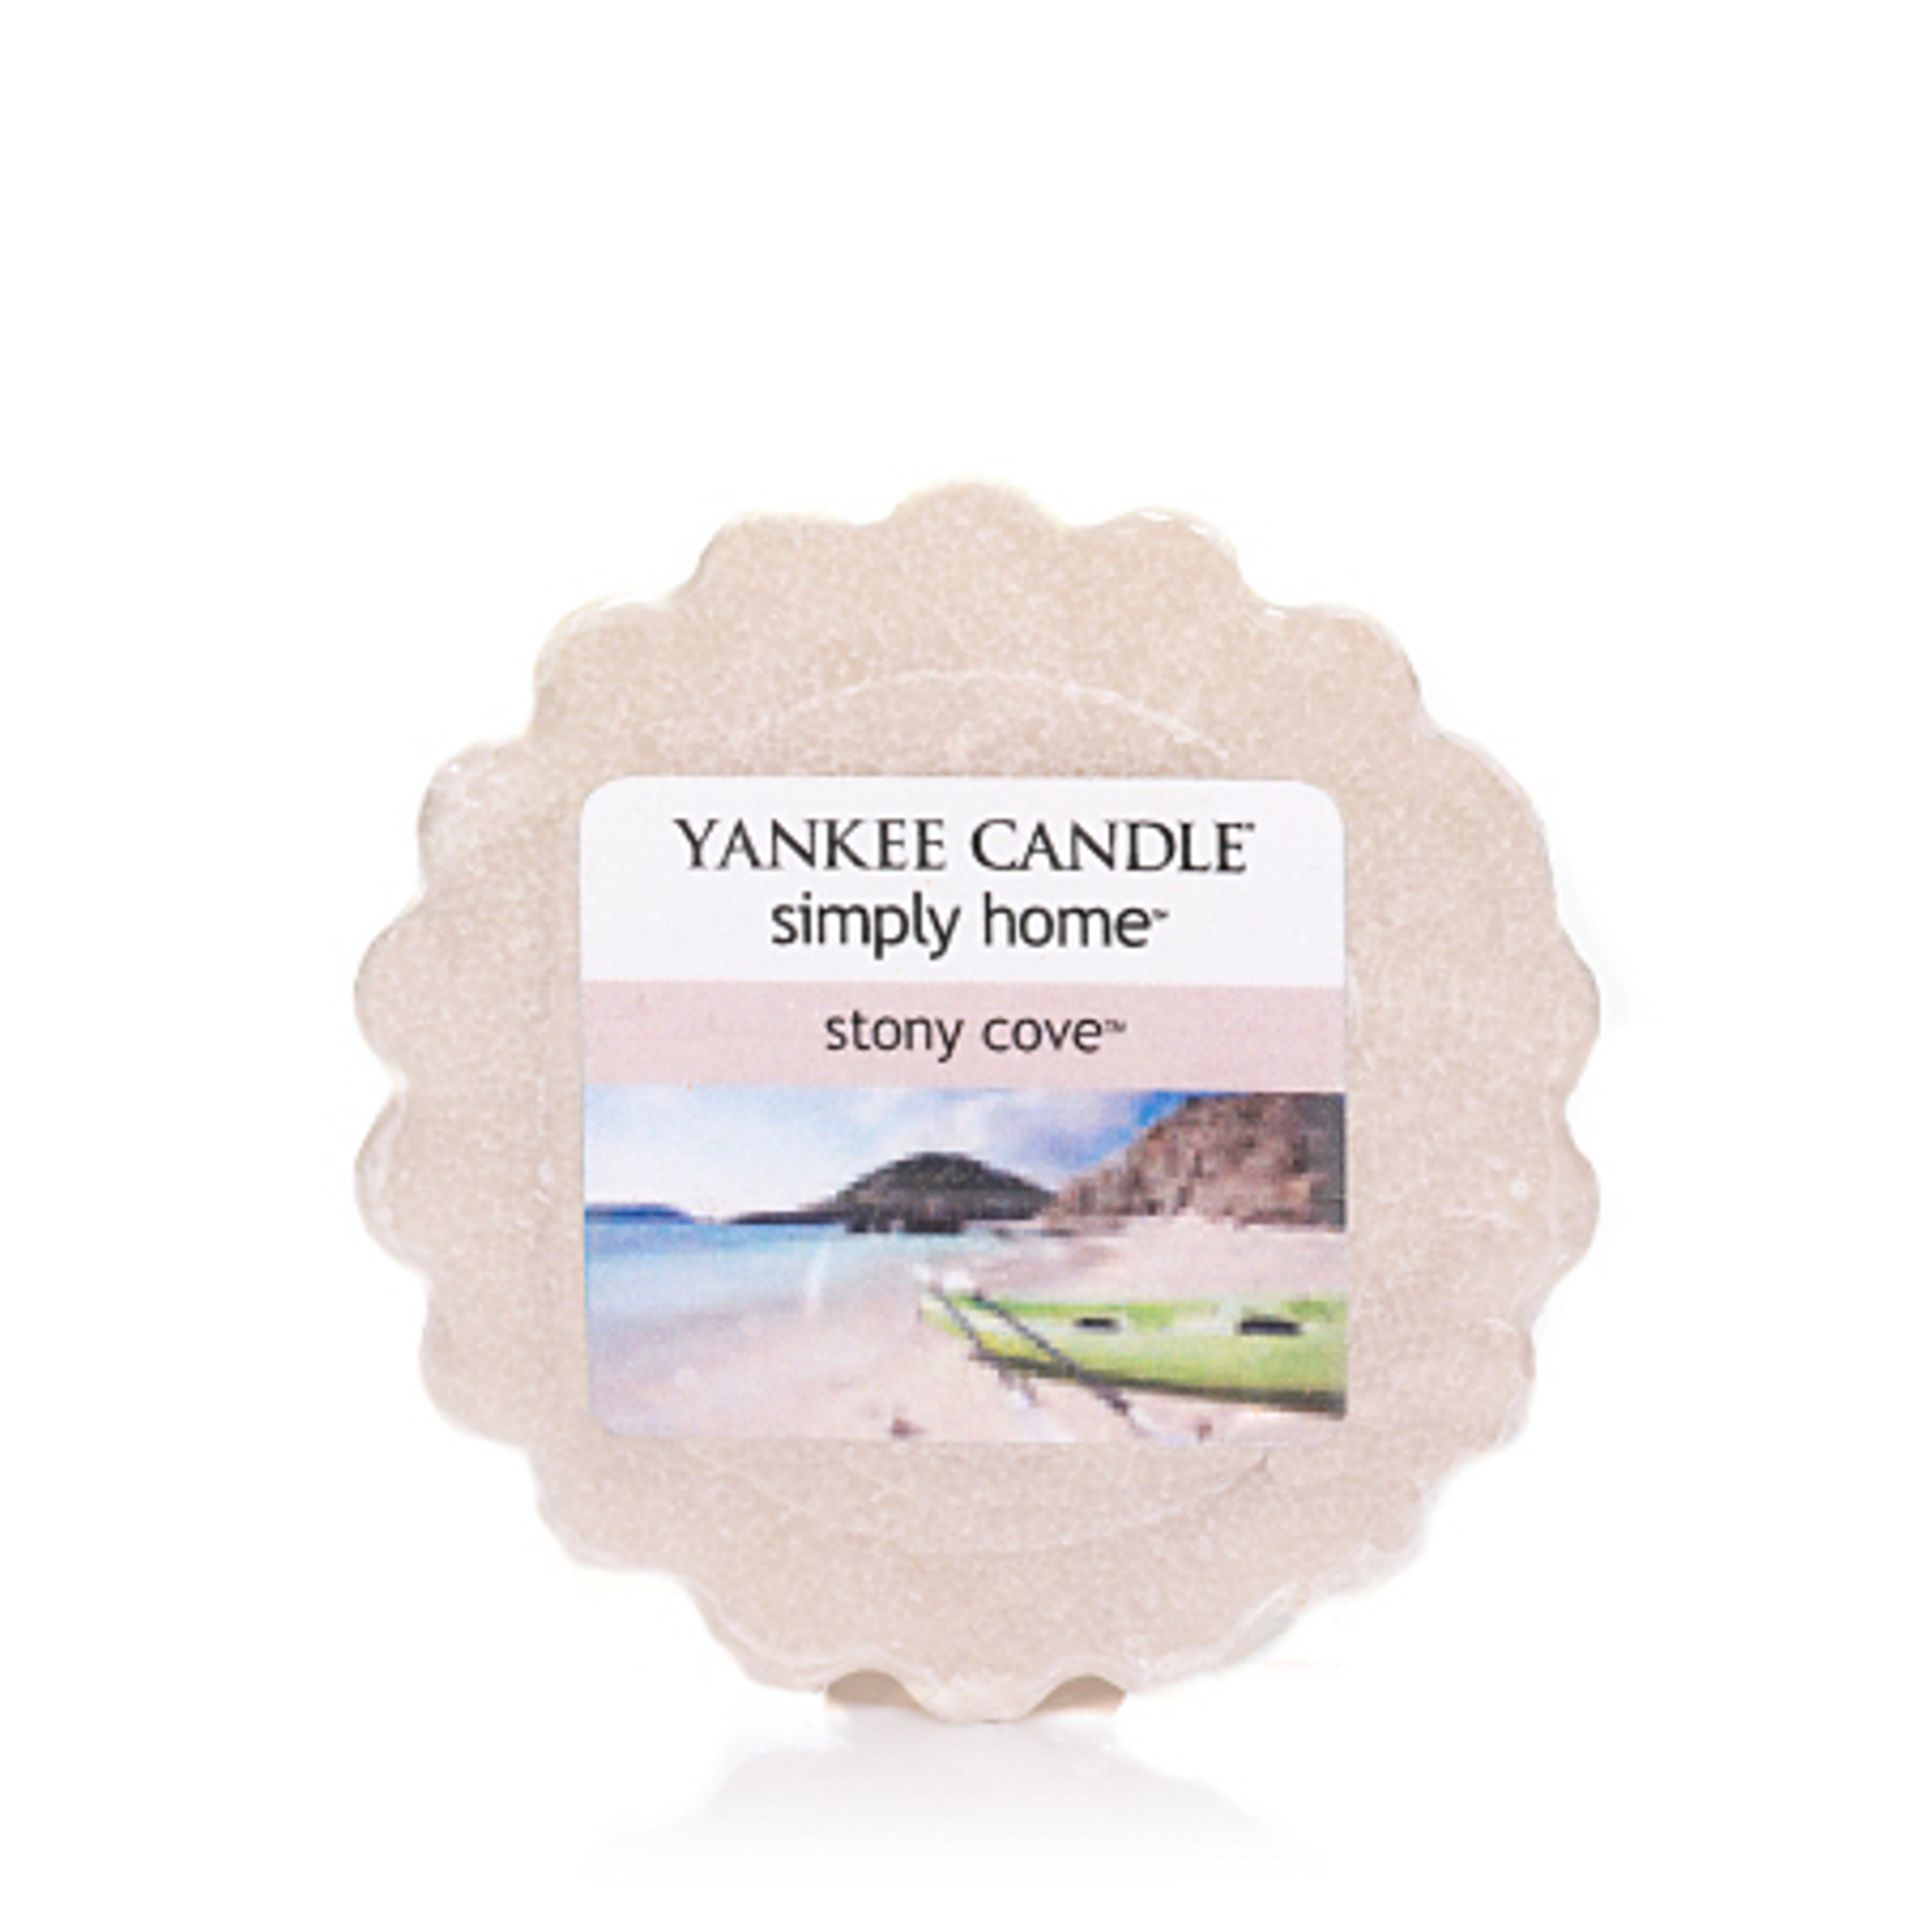 V *TRADE QTY* Brand New 24 x Yankee Candle Tarts Stony Cove RRP: £35.76 (Yankee Candles) X 8 YOUR